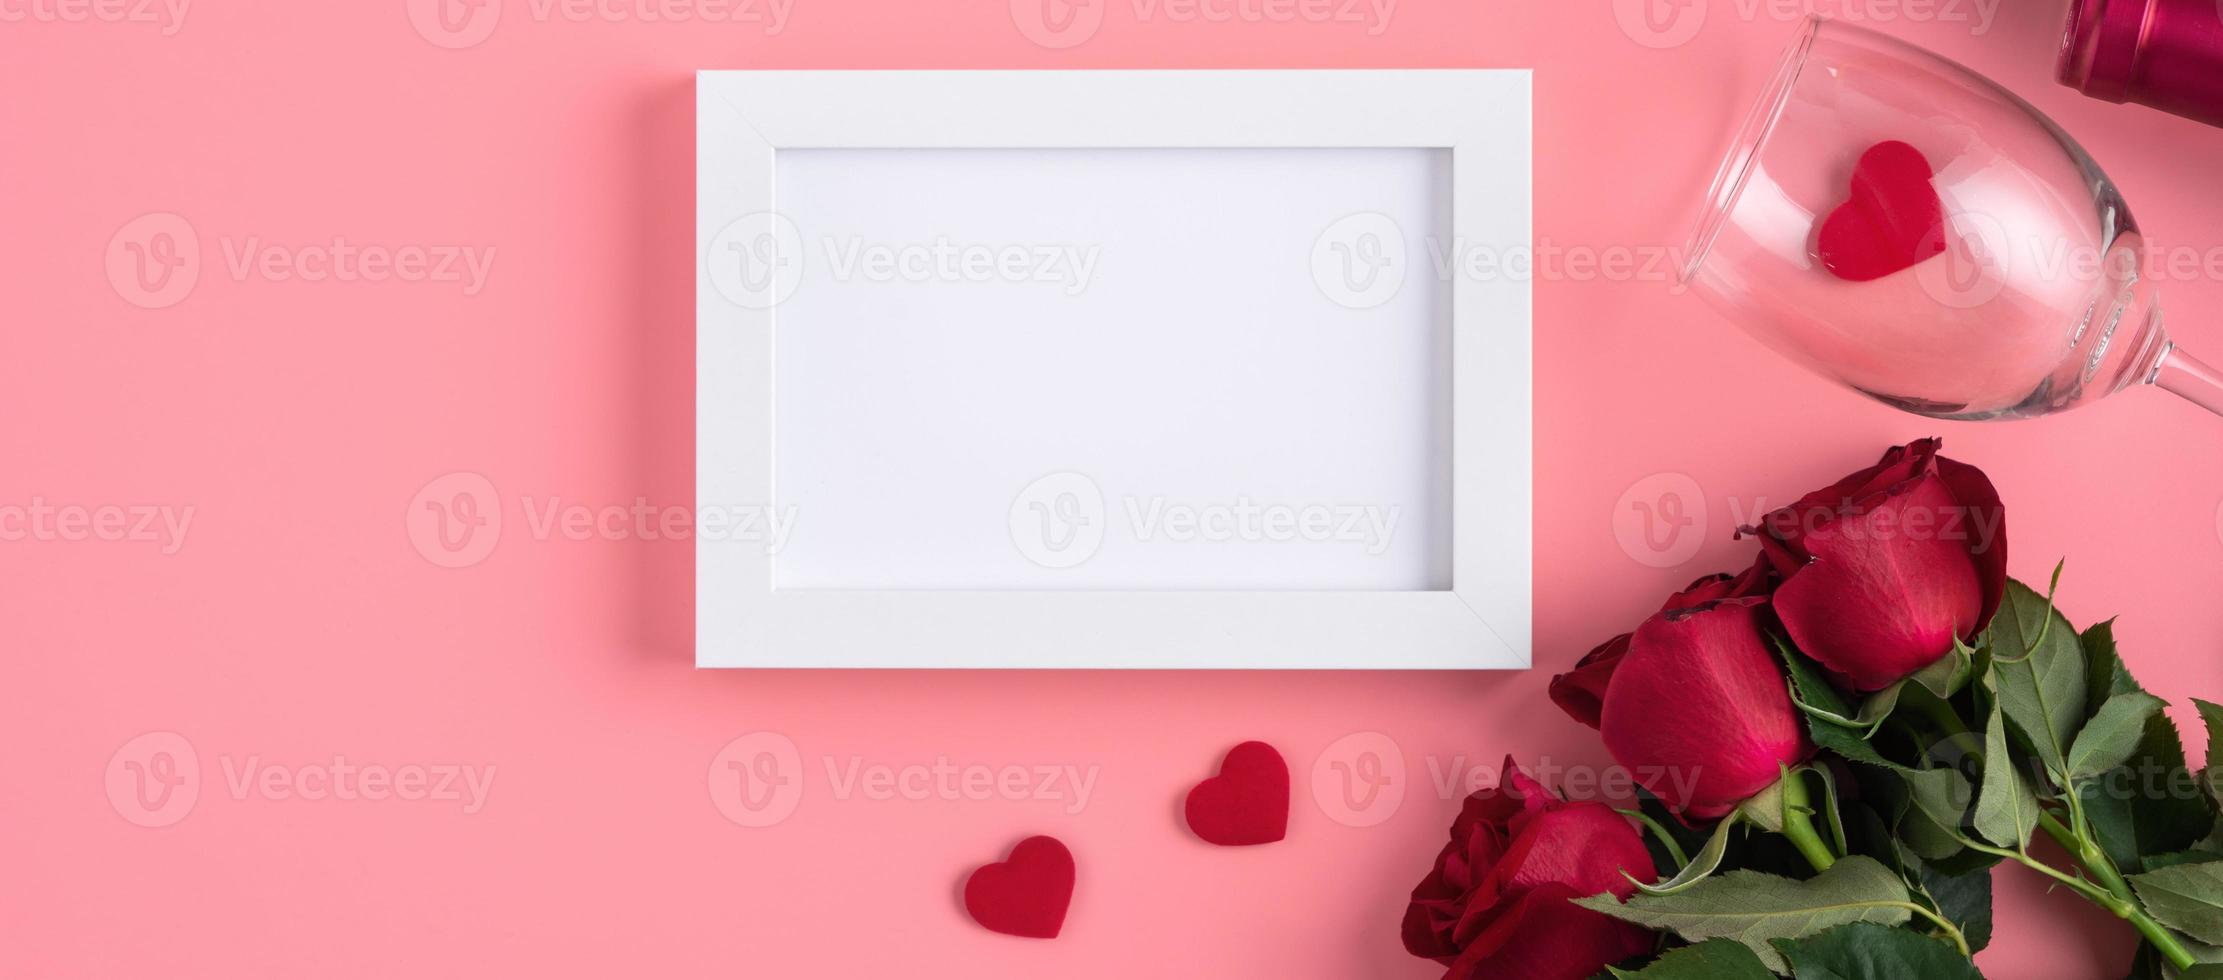 Valentine's Day memory with picture frame concept on pink background photo